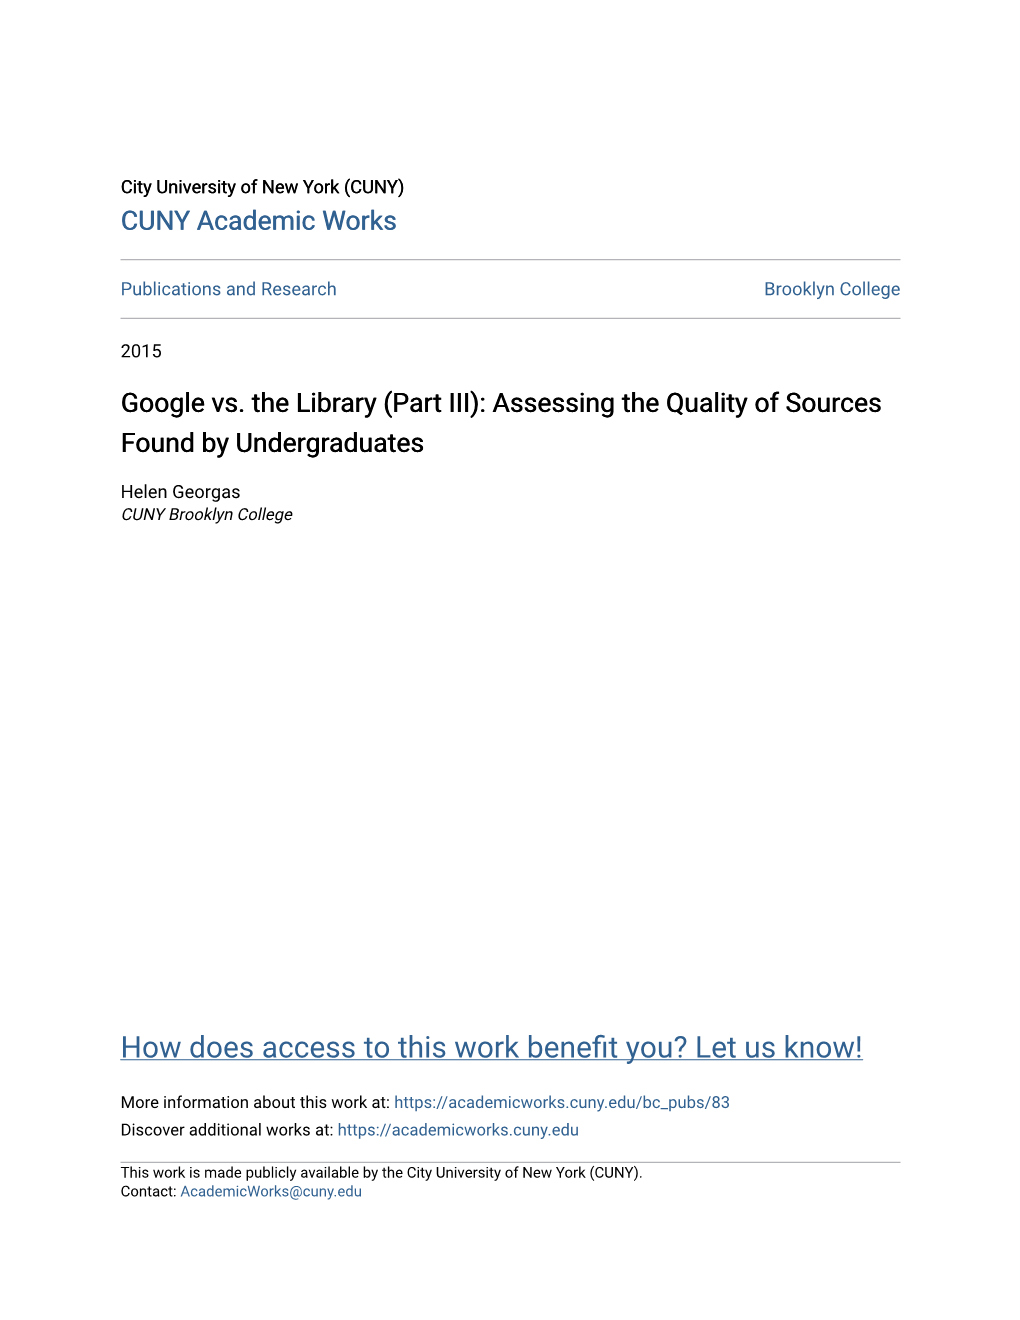 Google Vs. the Library (Part III): Assessing the Quality of Sources Found by Undergraduates